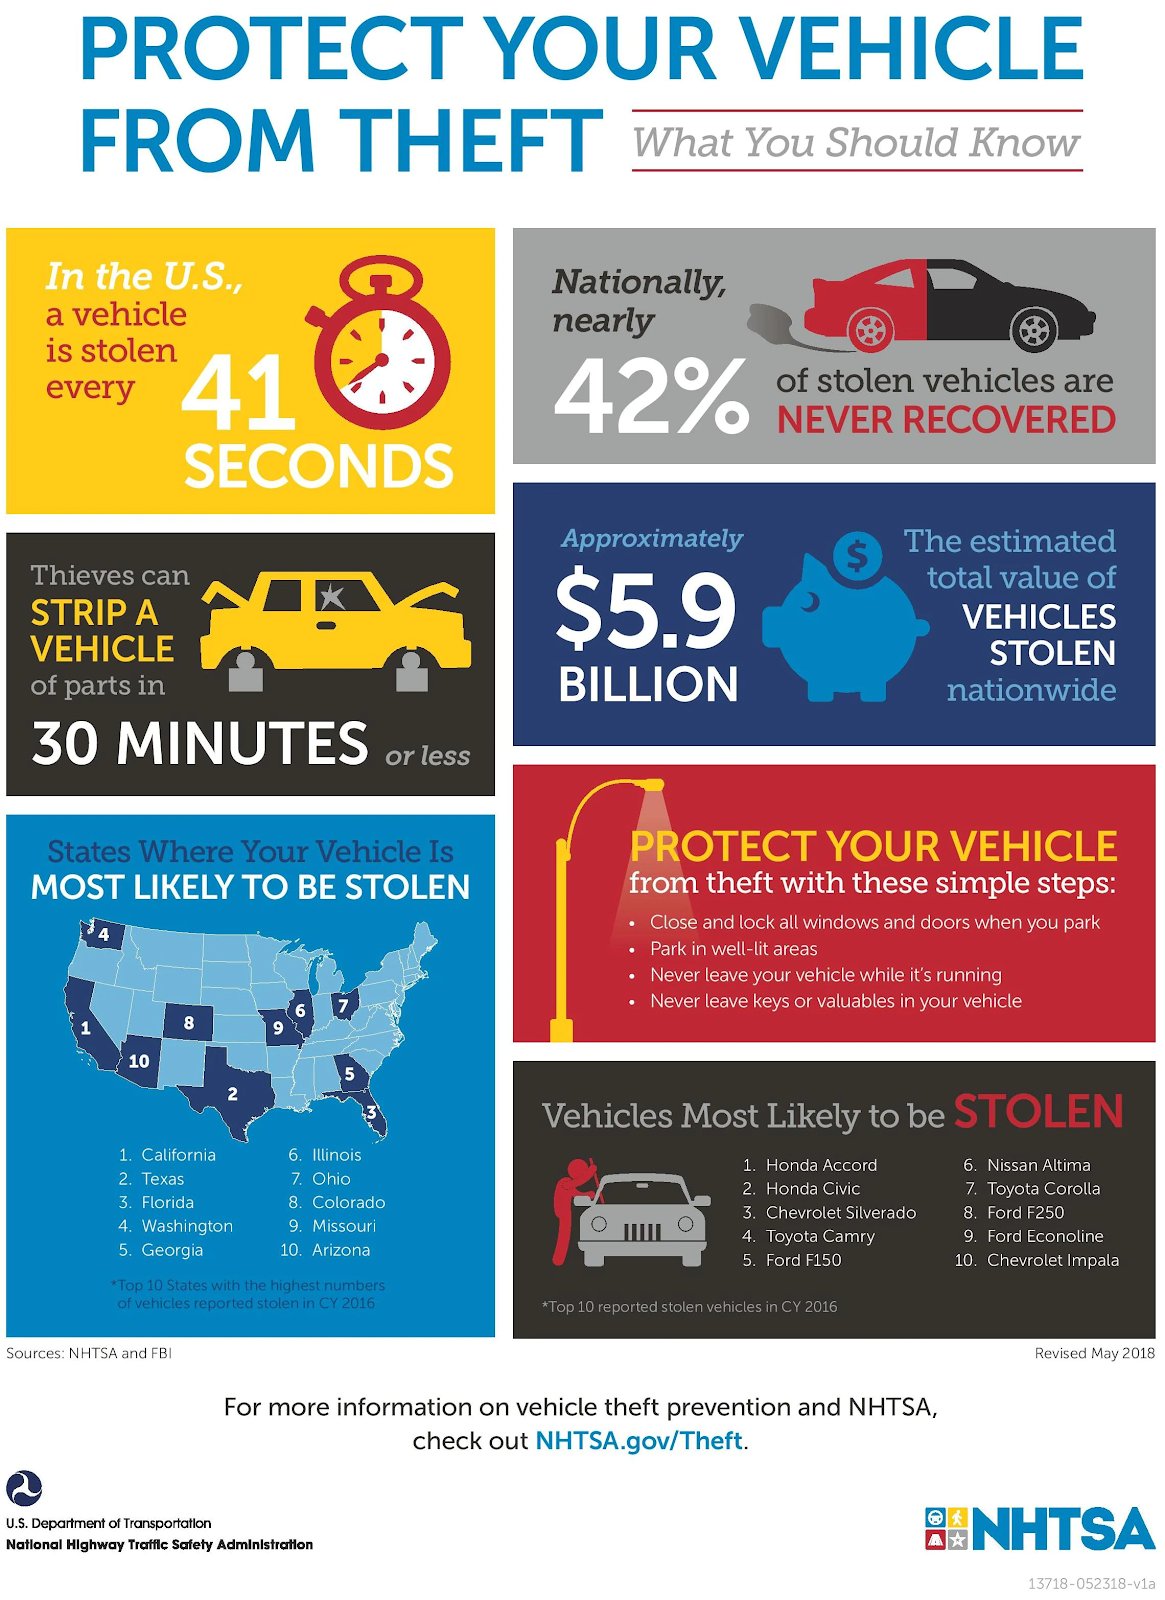 Protect your vehicle from theft.